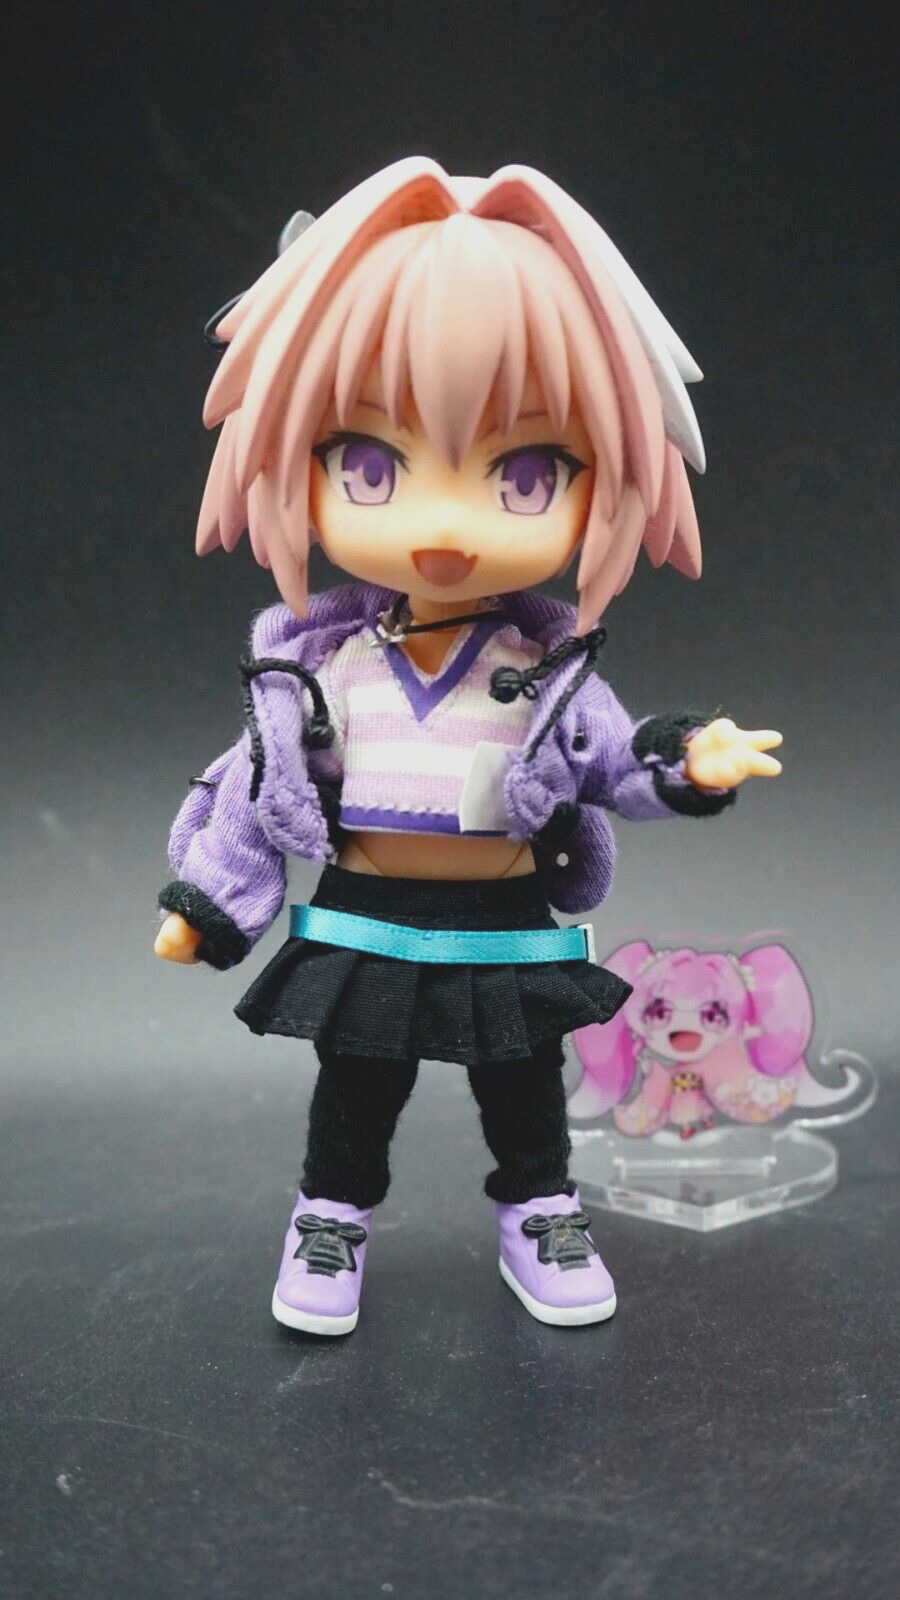 Fate/Apocrypha Rider of Black Astolfo Casual ver. Figure Doll [ JUNK ]